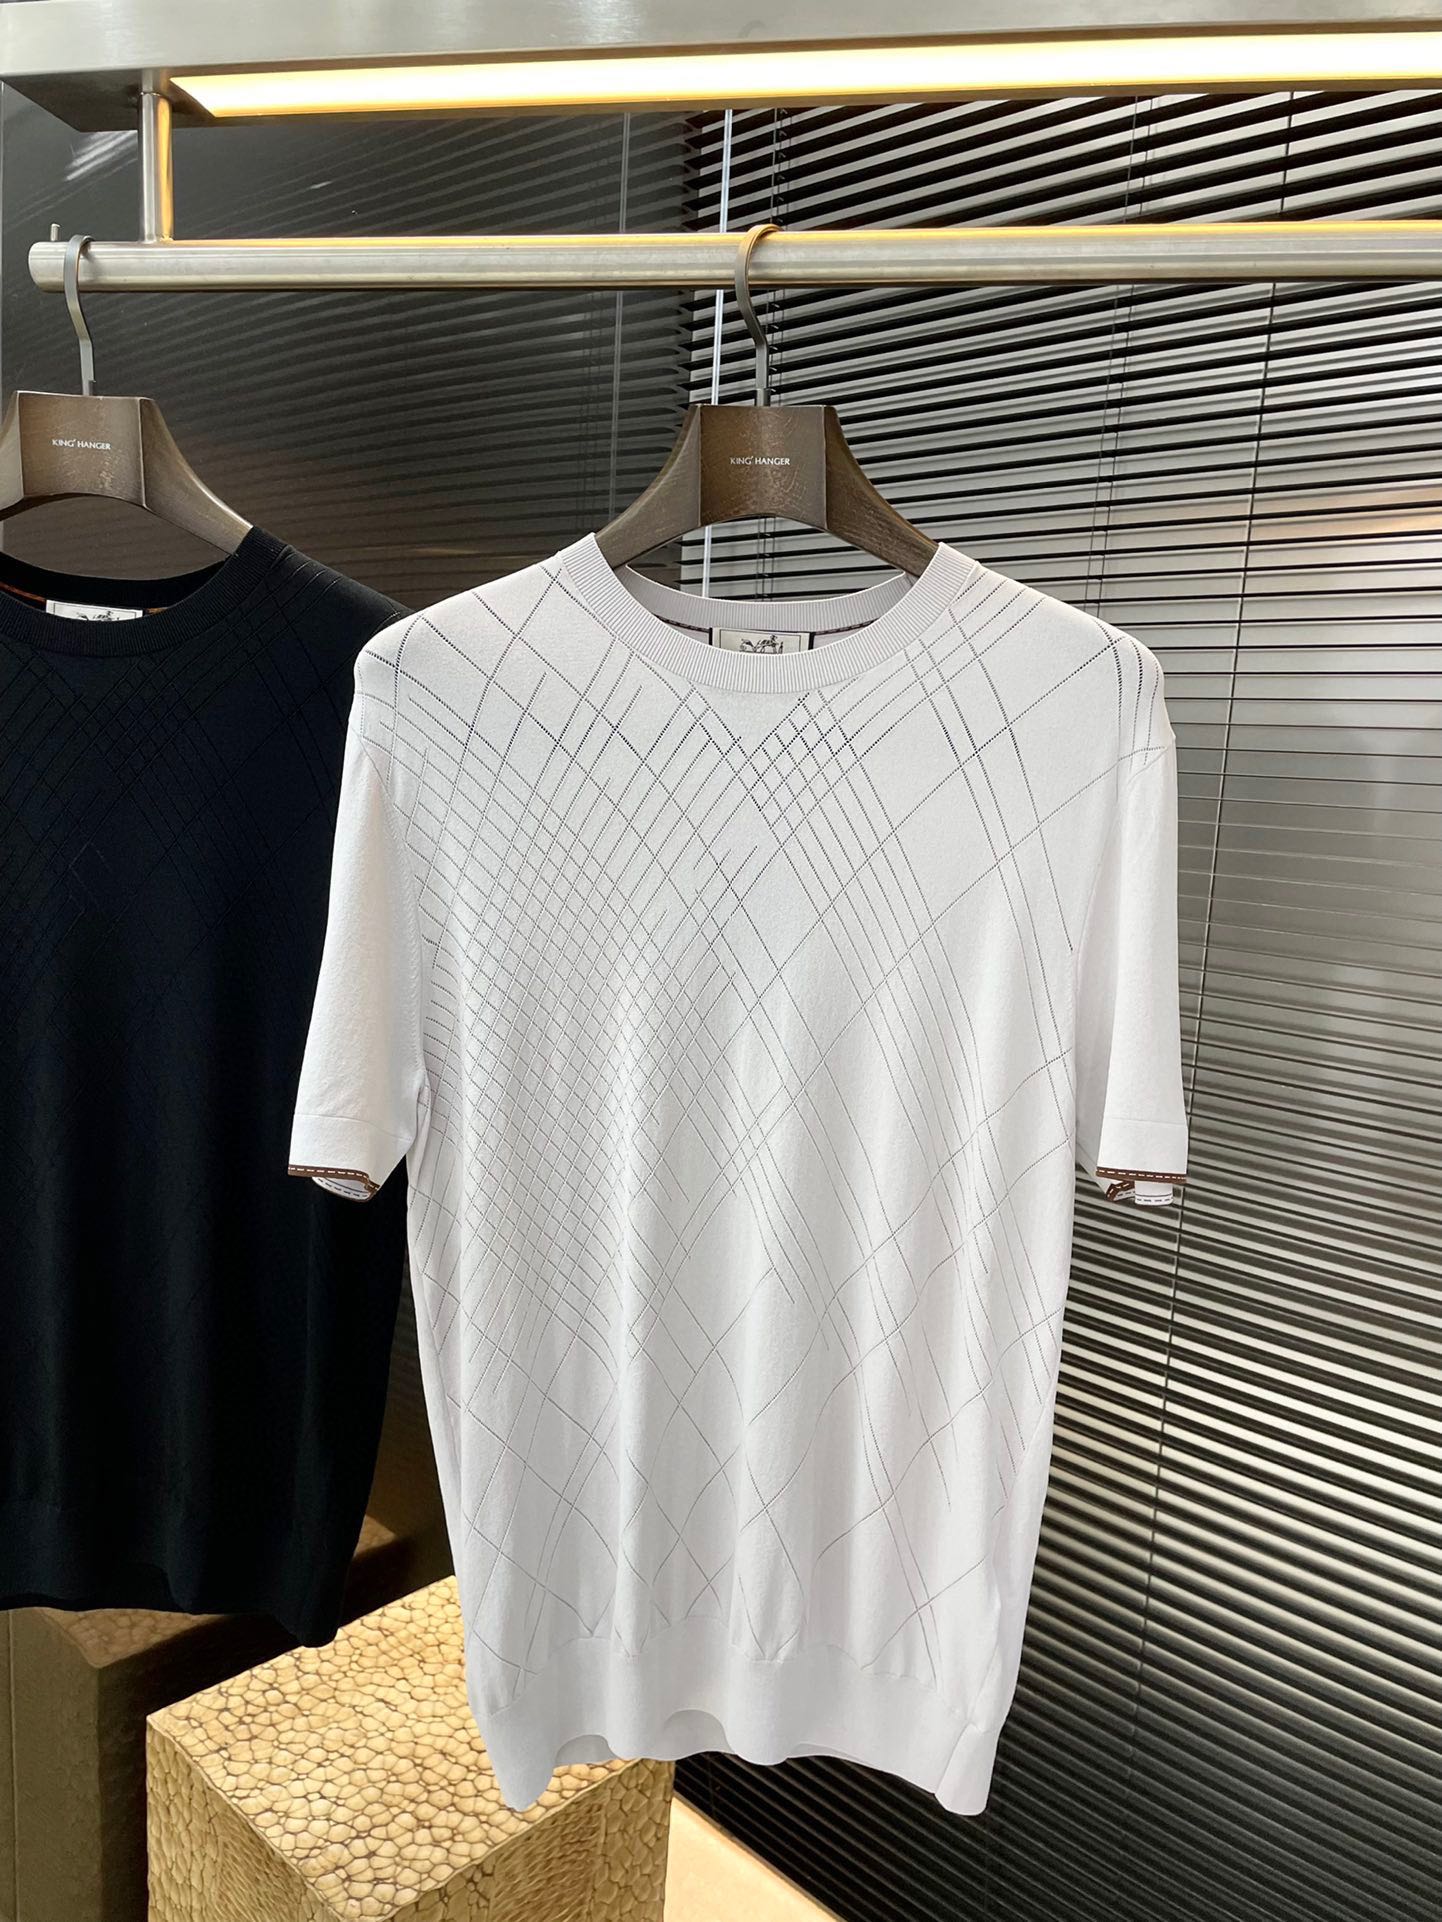 Hermes Clothing T-Shirt Perfect Quality
 Men Spring/Summer Collection Fashion Short Sleeve